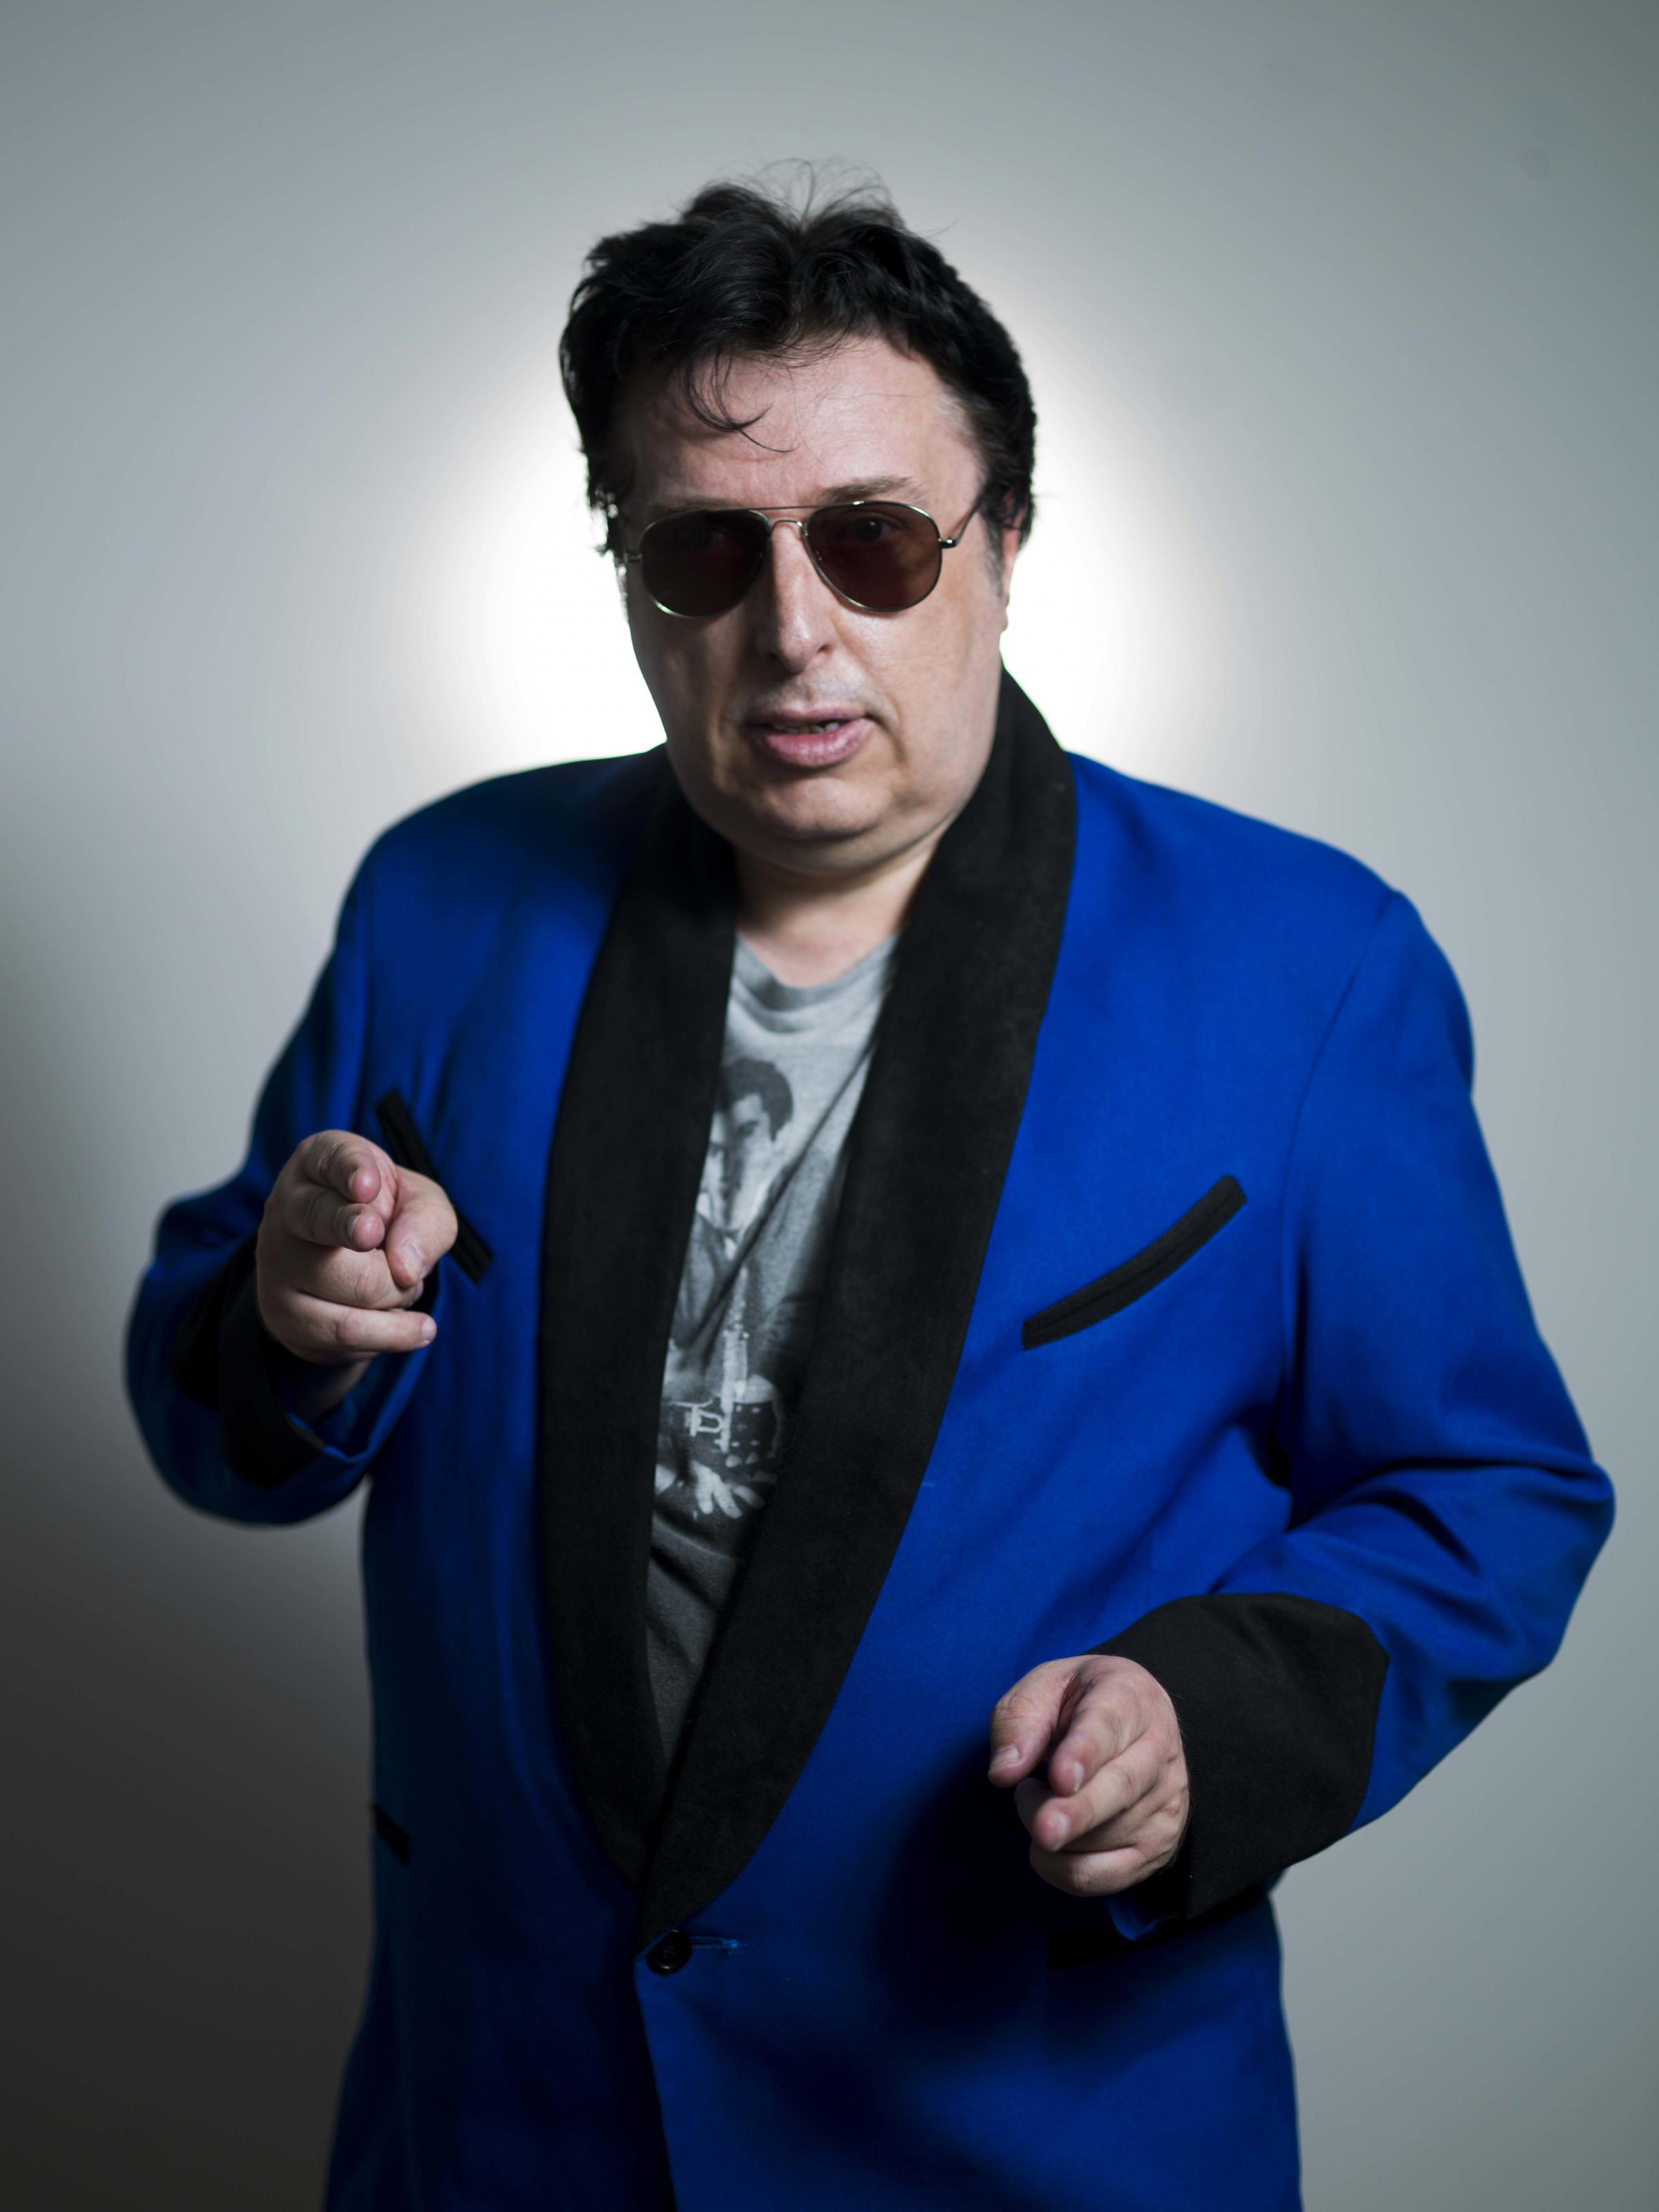 Elvis impersonator Eddie Vee thought the pandemic would blow over 